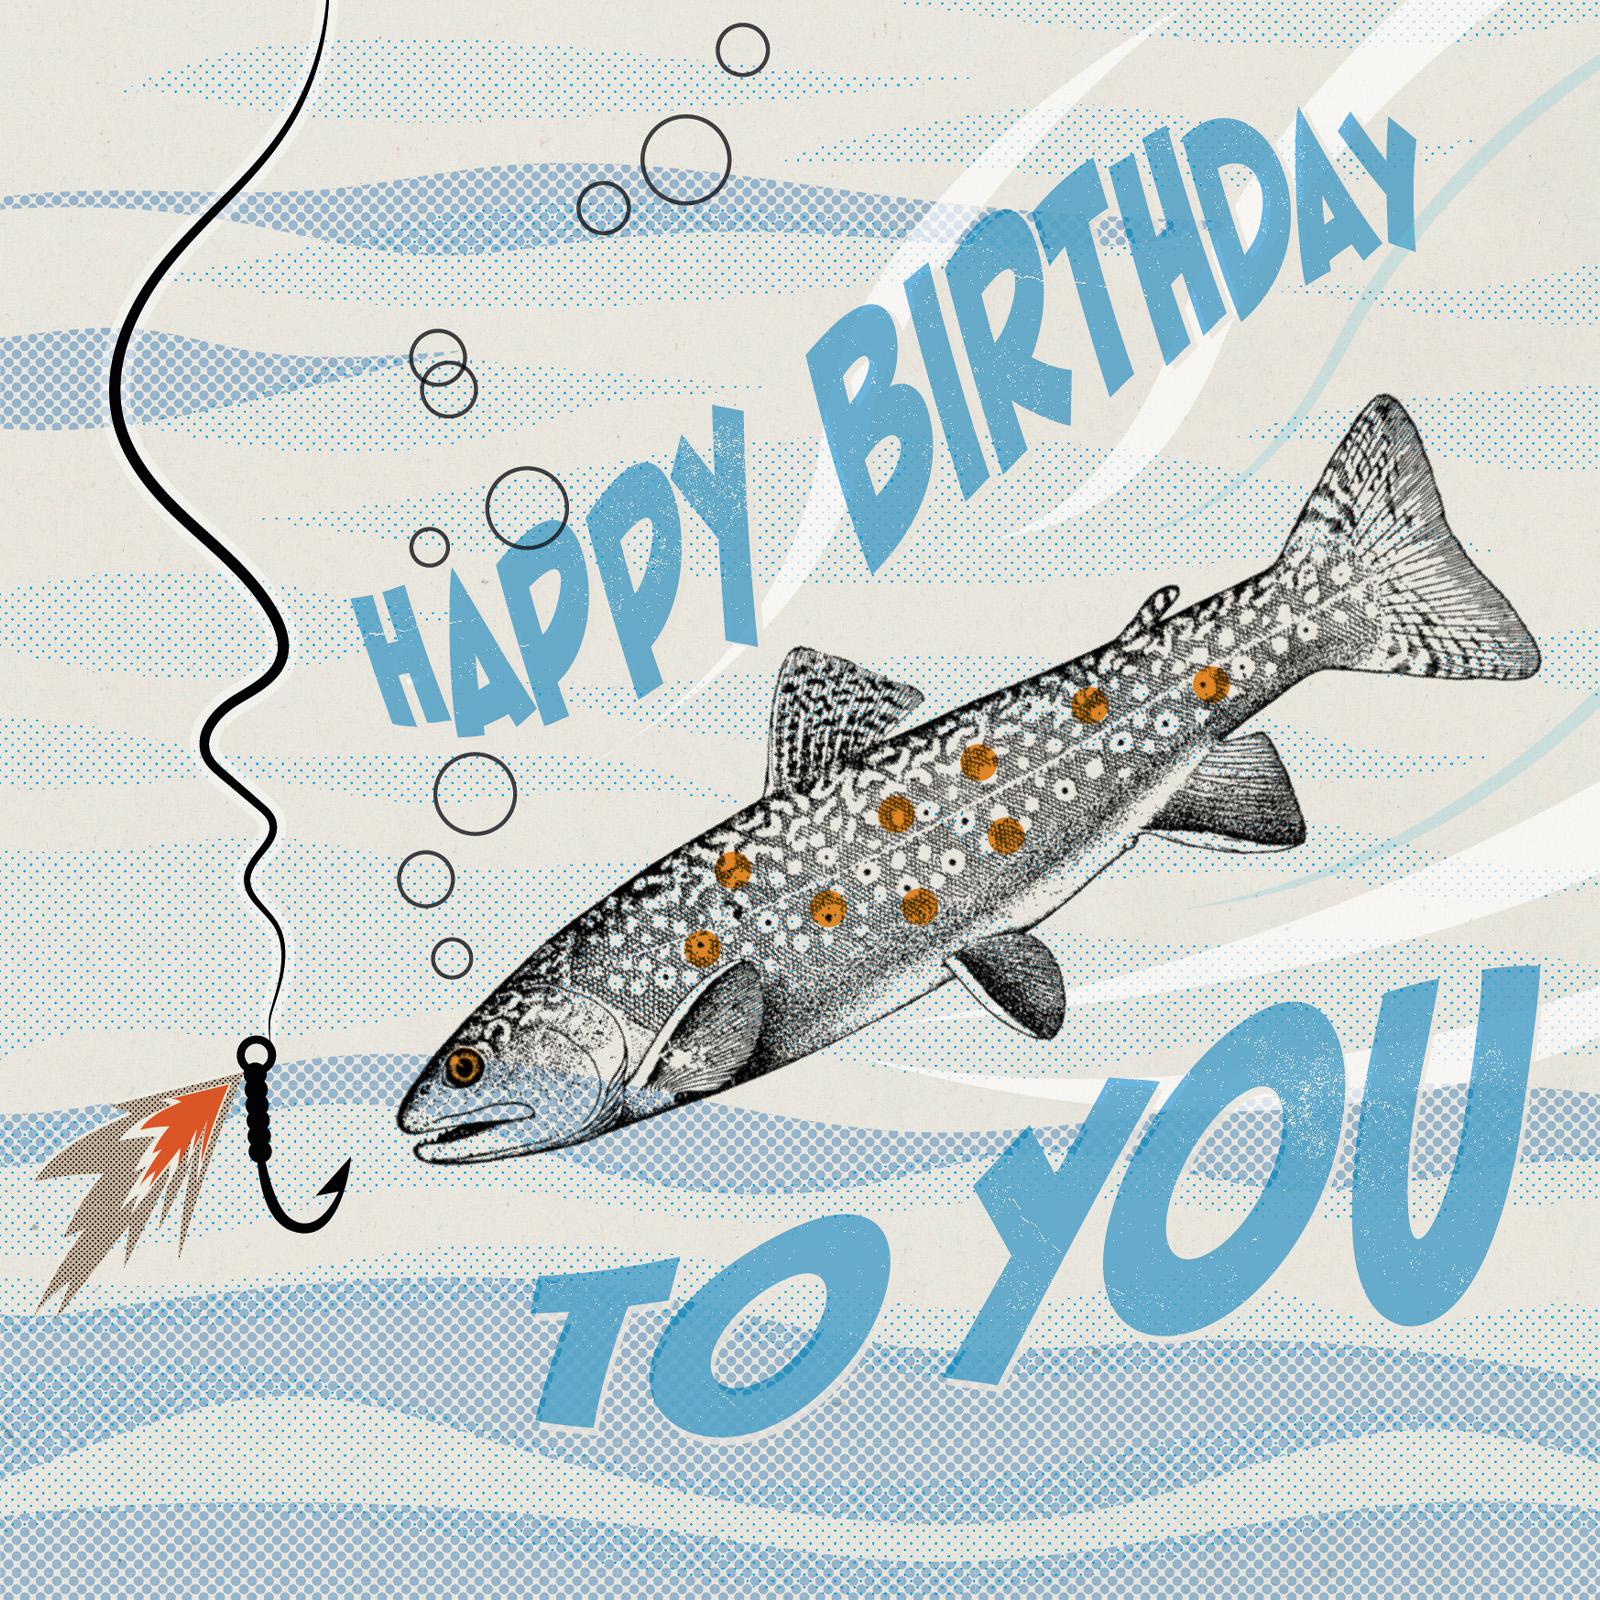 vintage fish illustration with fly hook and abstract 50s-style water and bubbles background in blue tones with text happy birthday to you